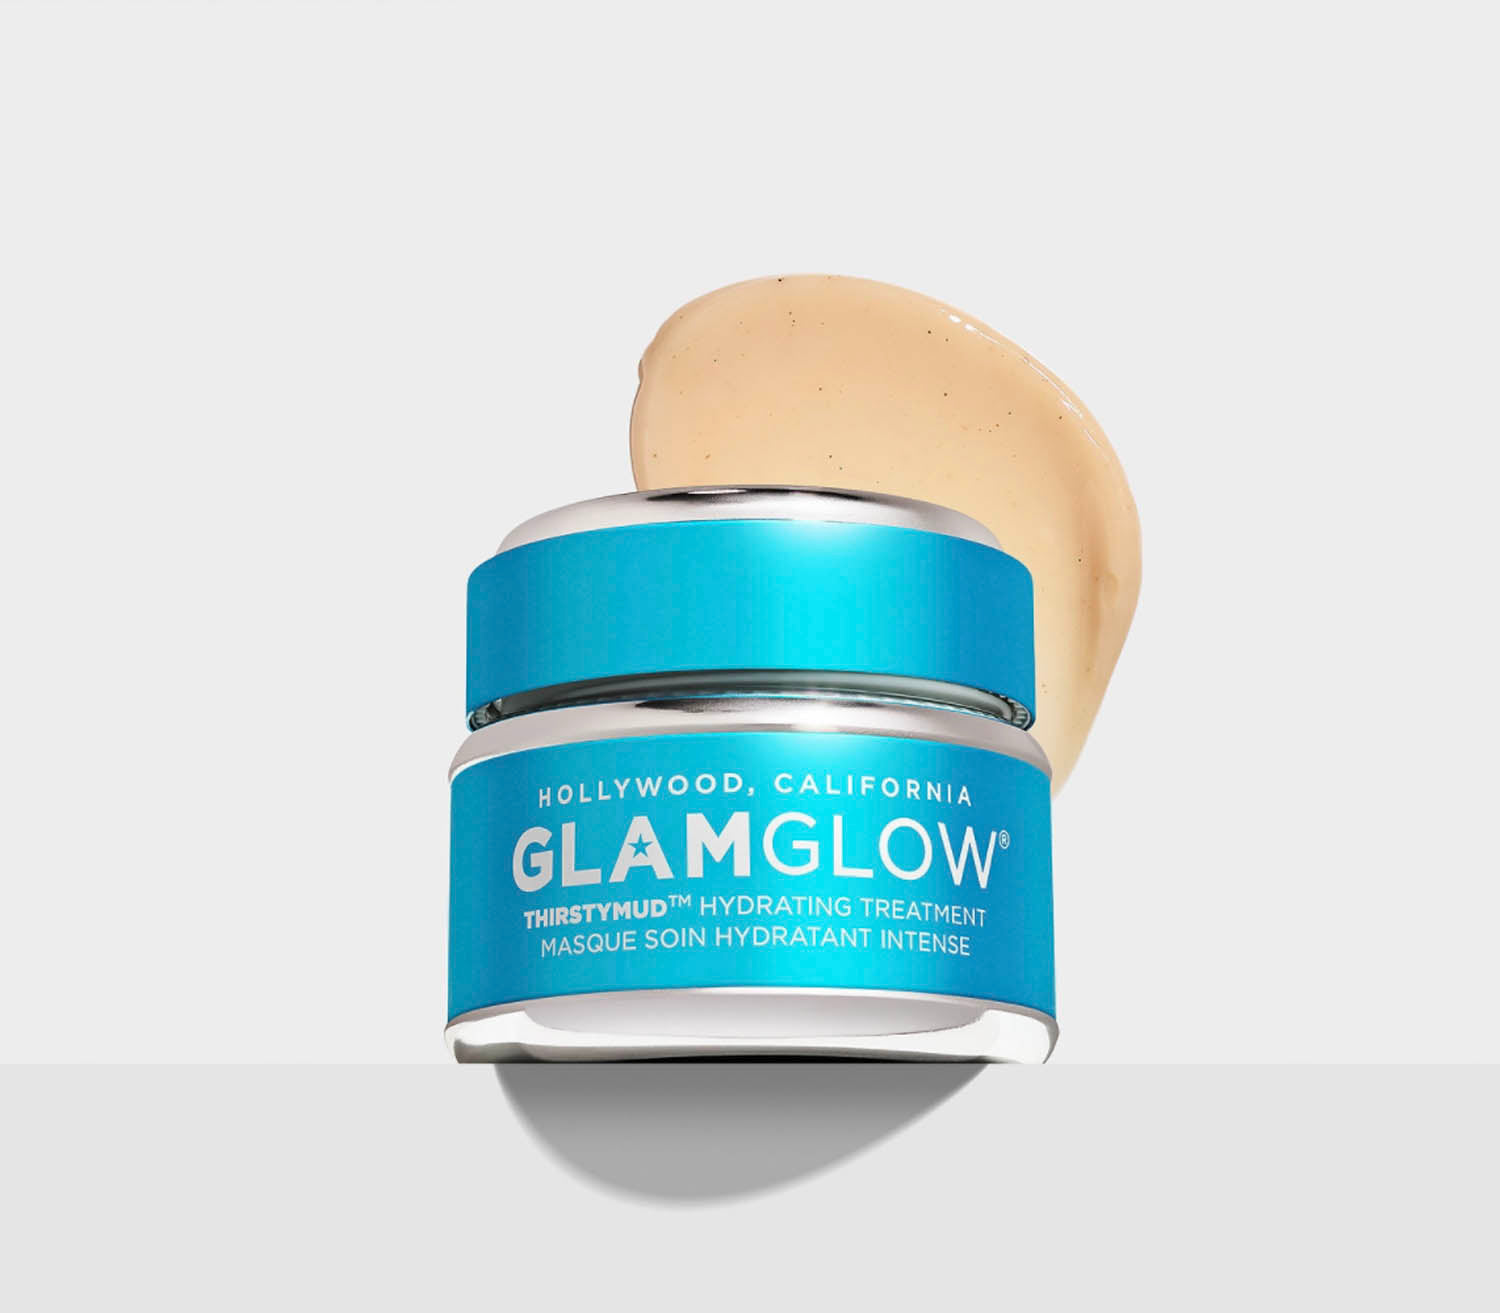 Glam Glow face mask product